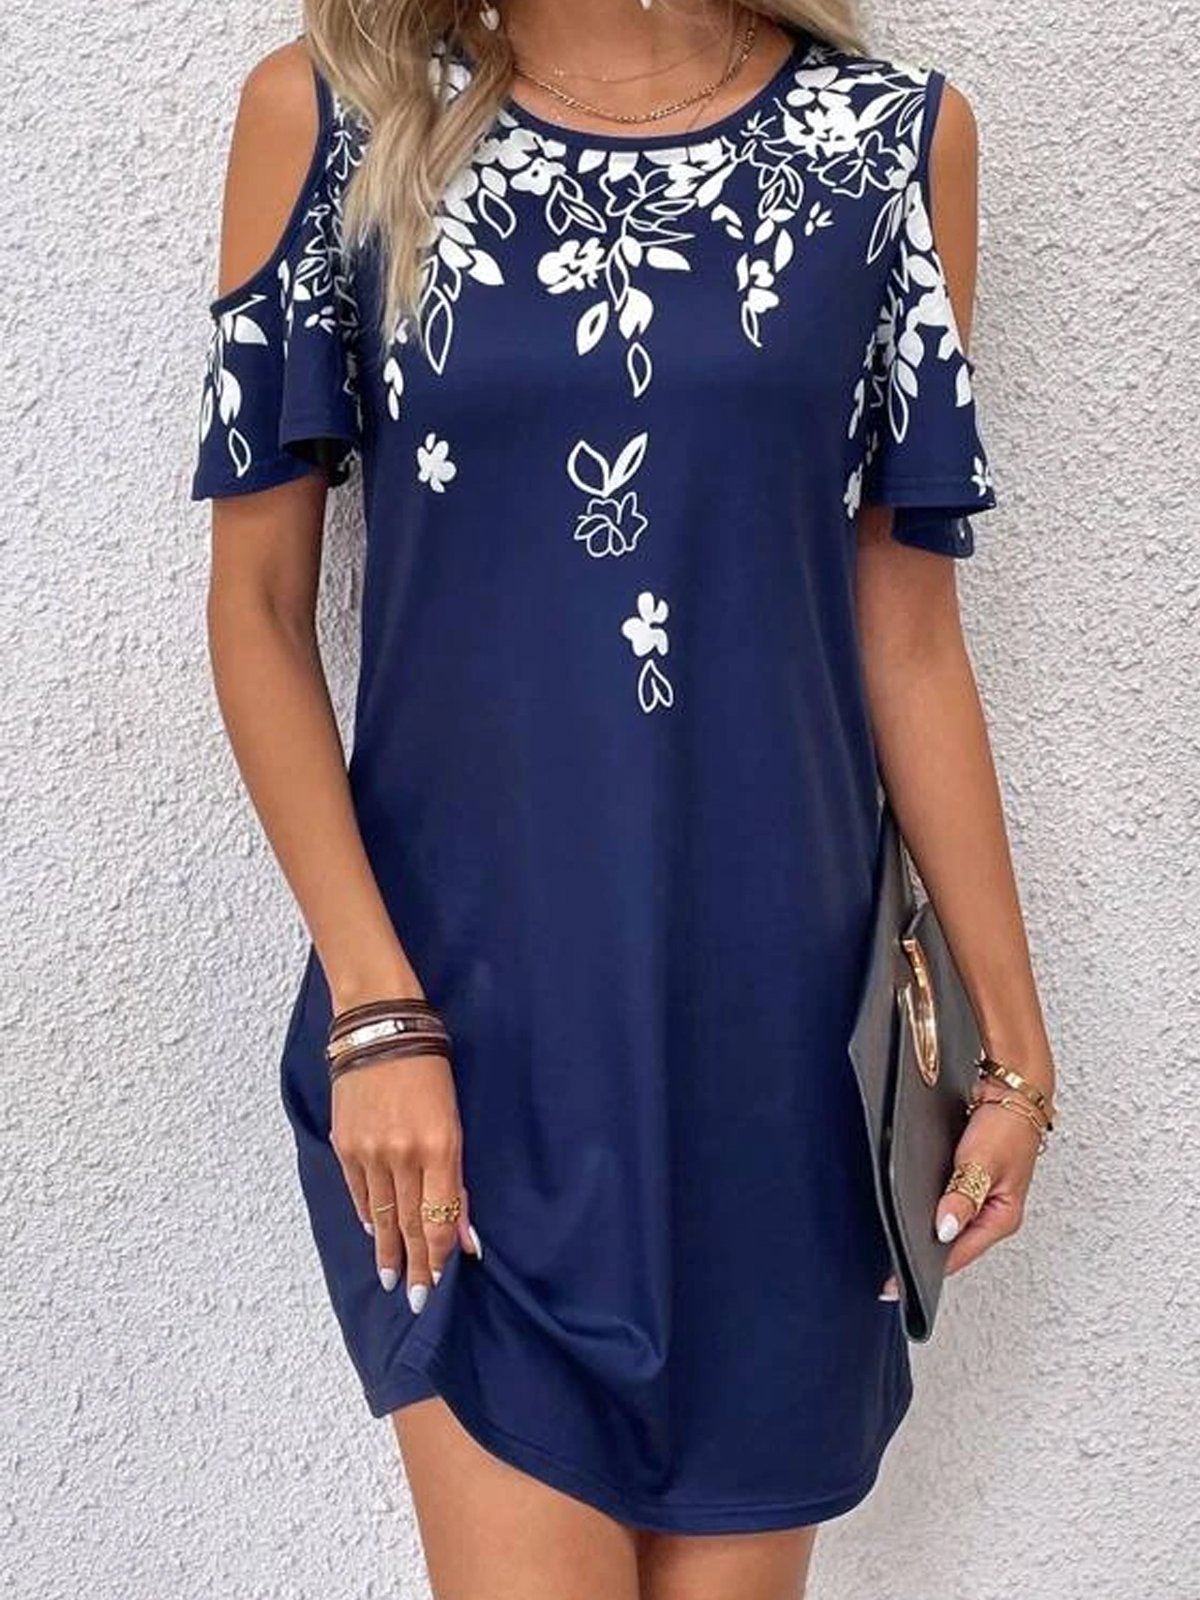 Loose Cut-Outs Casual Crew Neck Dress